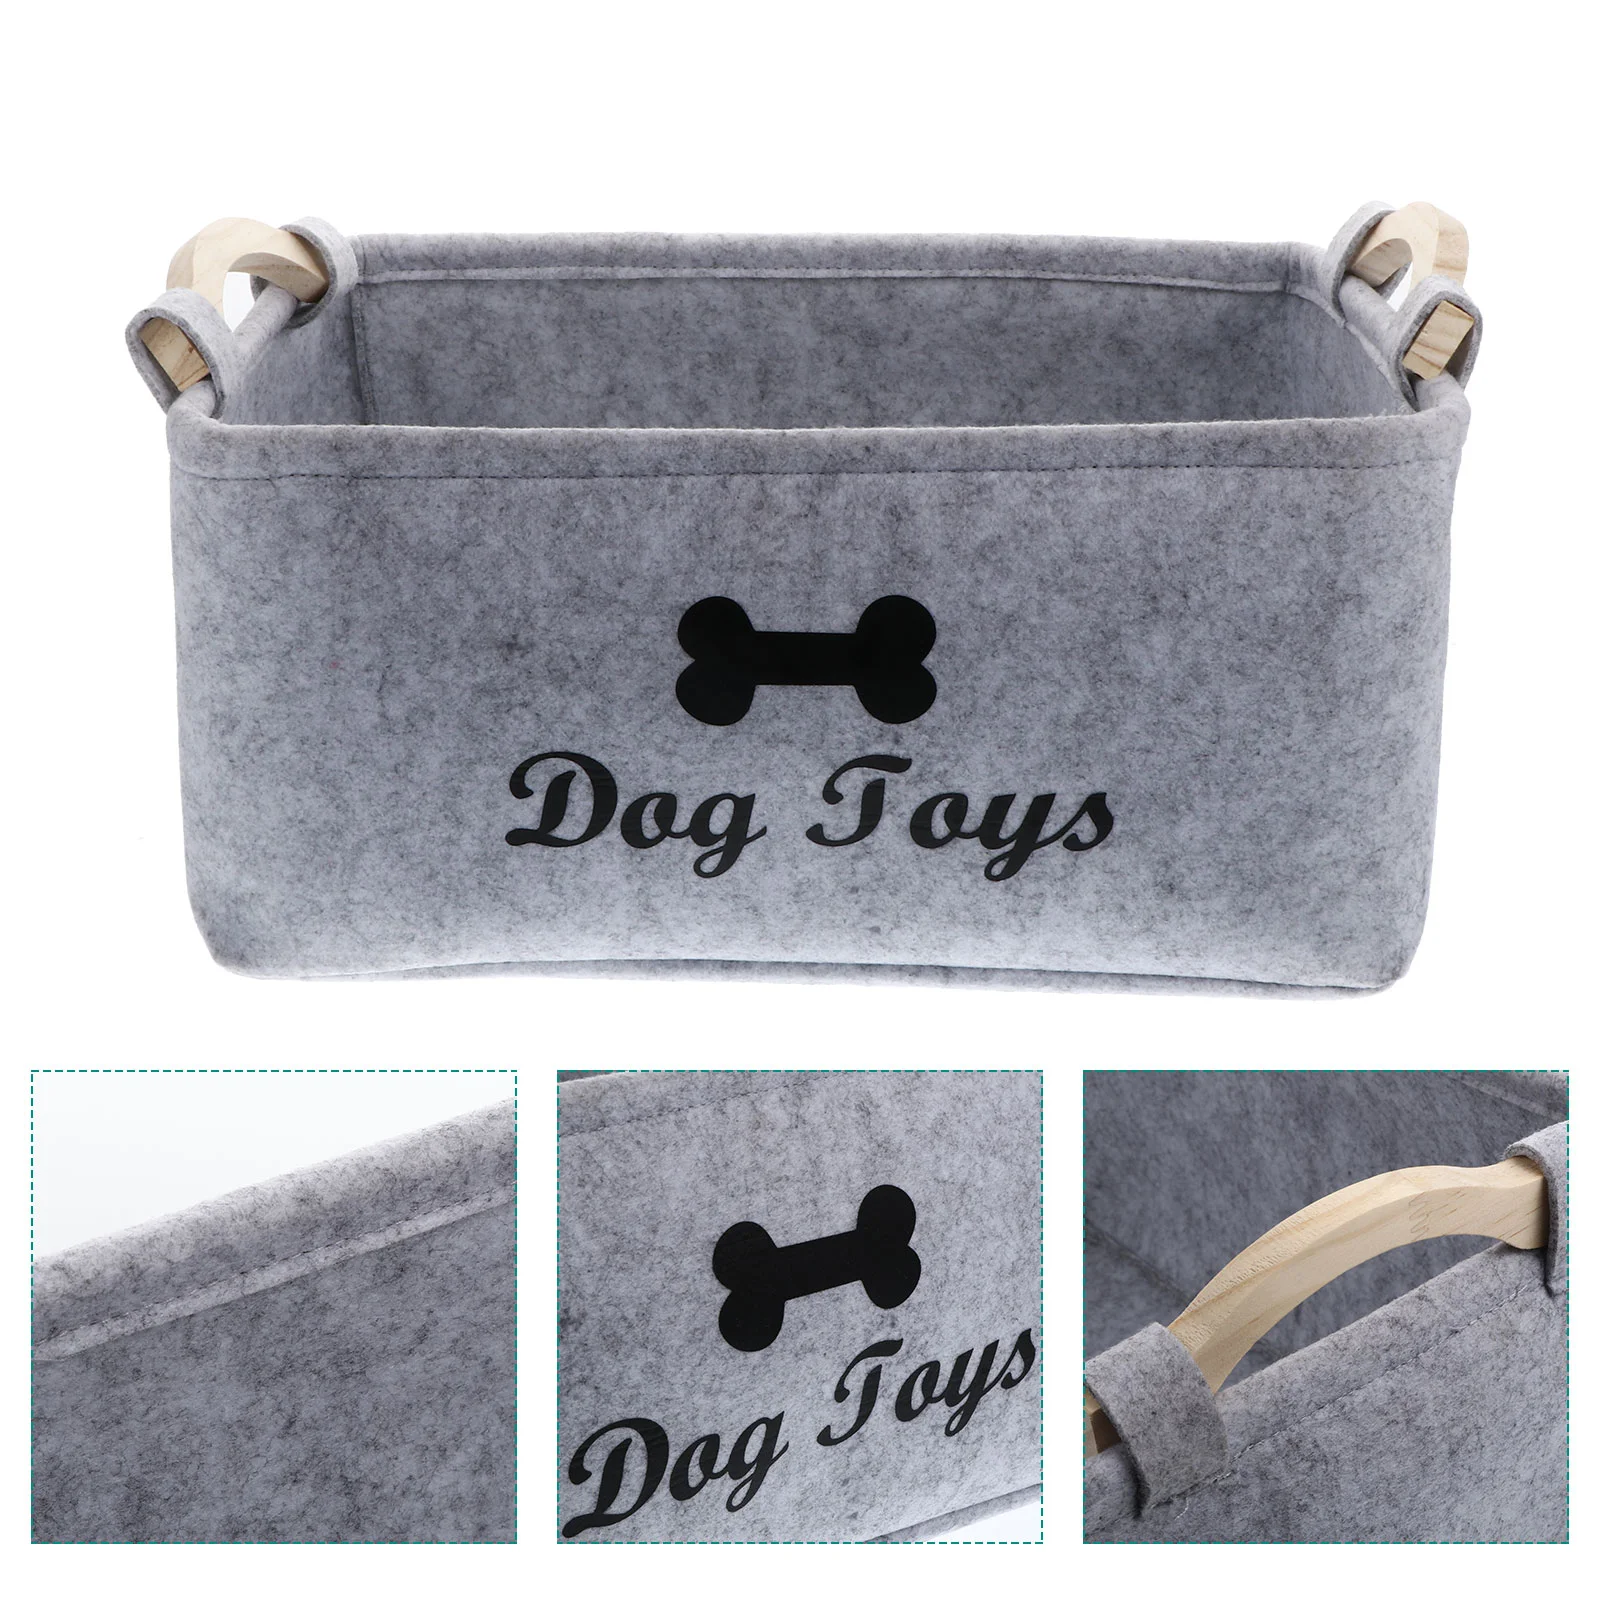 

Toy Dog Basket Storage Pet Bin Boxcat Organizer Felt Toys Baskets Organizing Accessory Accessories Containers Container Cats